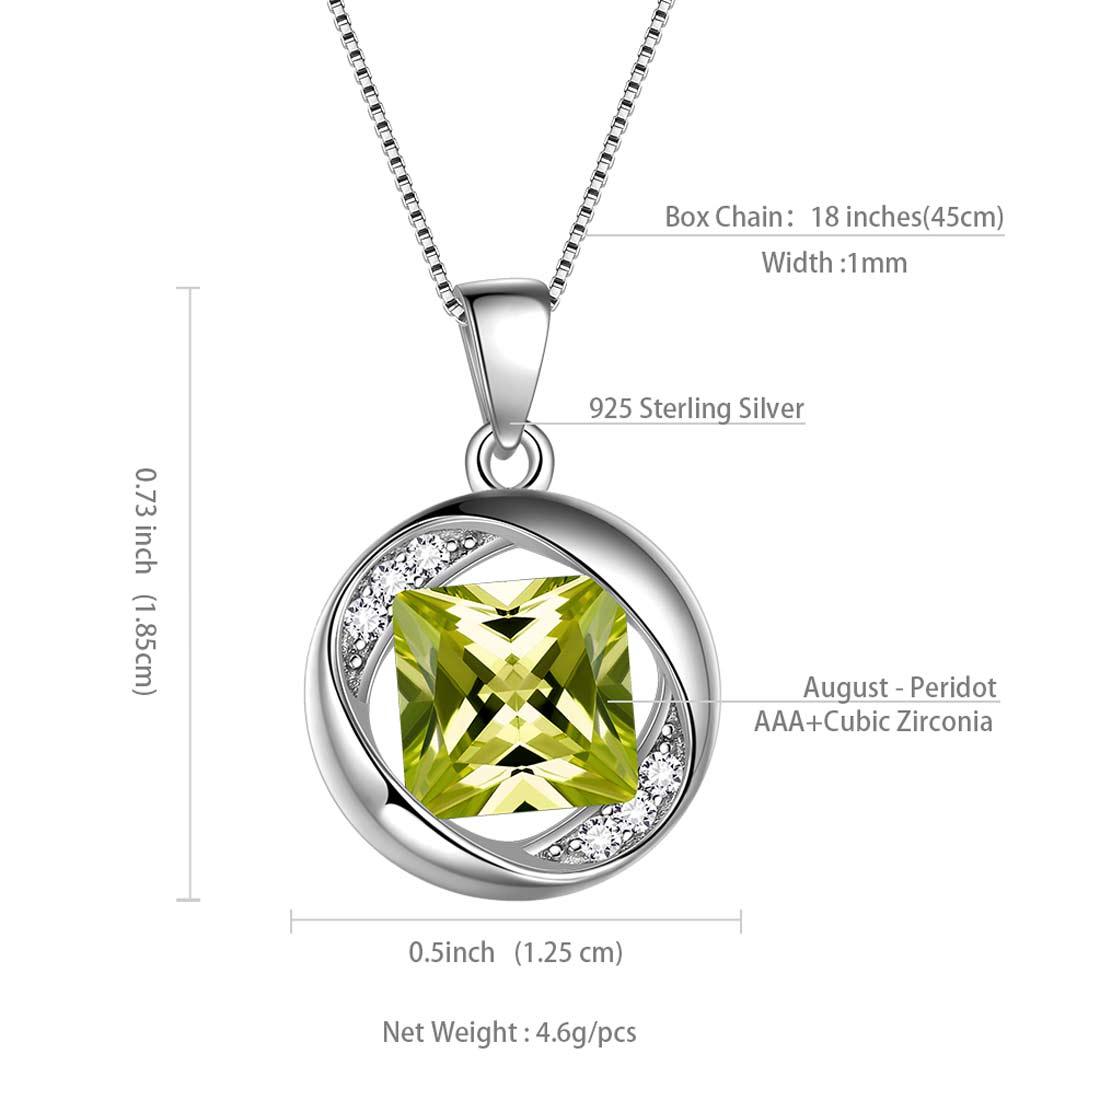 Round Birthstone August Peridot Necklace Pendant - Necklaces - Aurora Tears